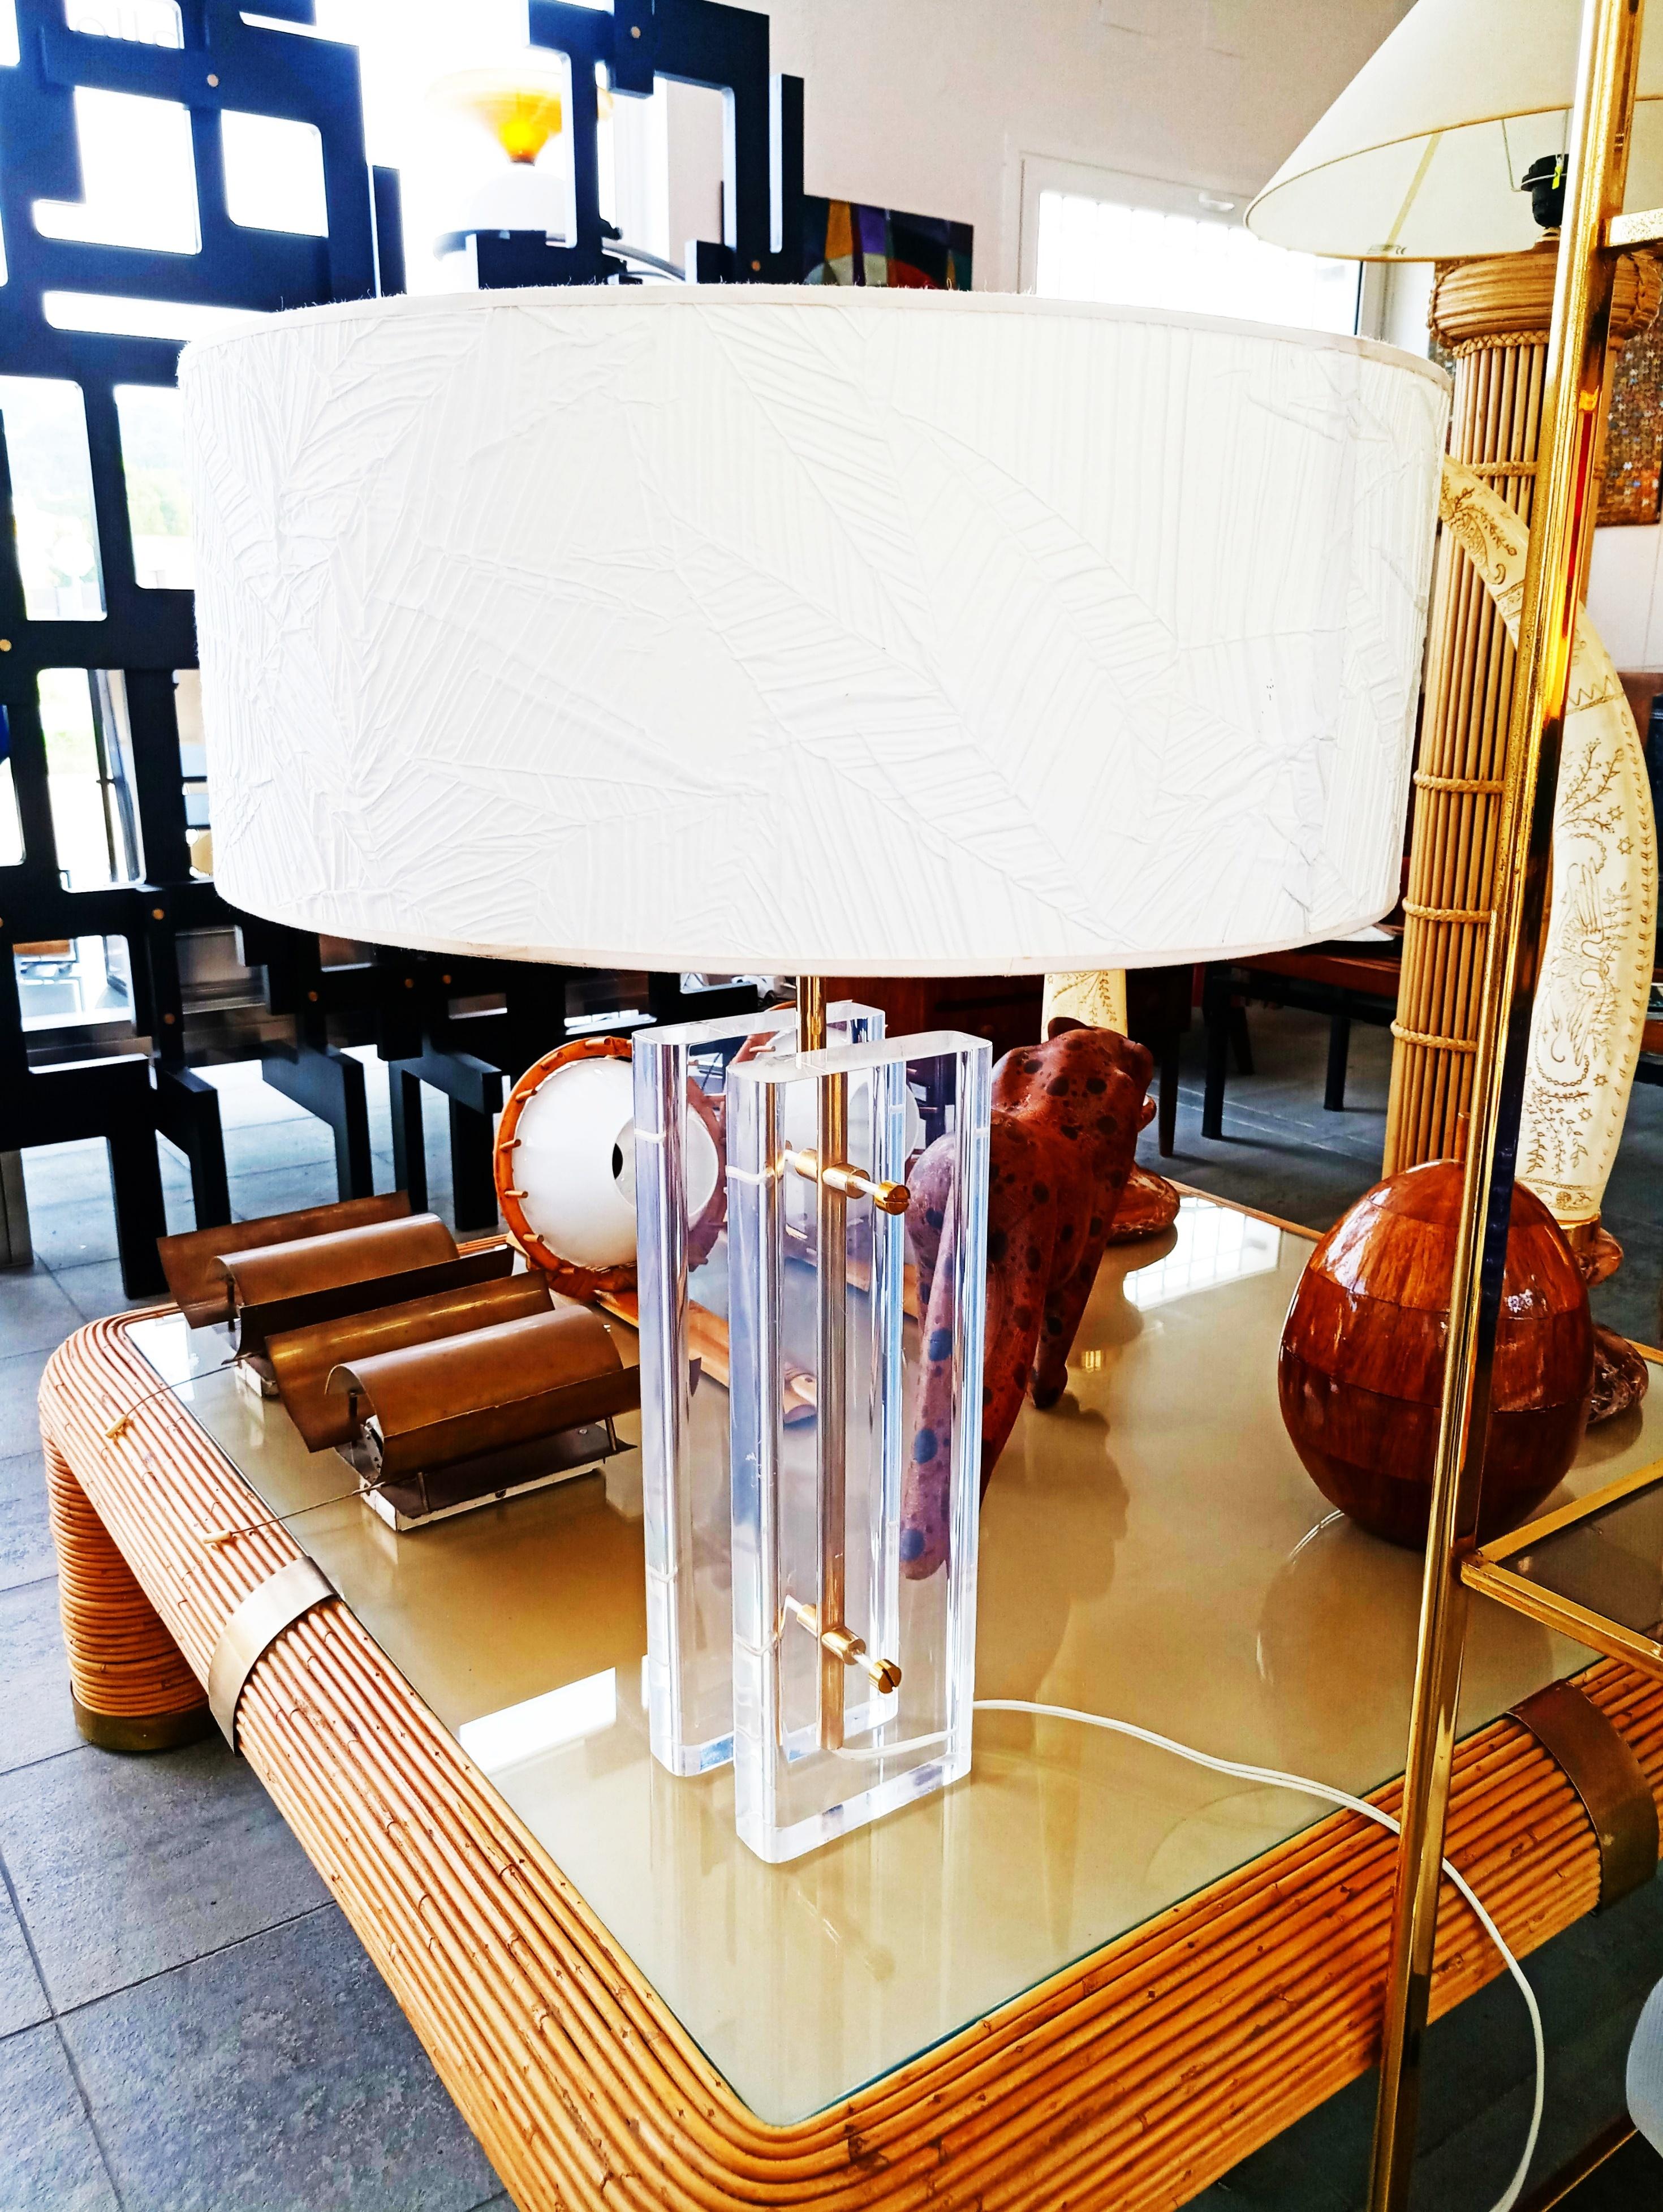 Rare and beautiful large Charles Hollis Jones Lucite and brass table lamp manufactured in 1970s. In perfect vintage condition.